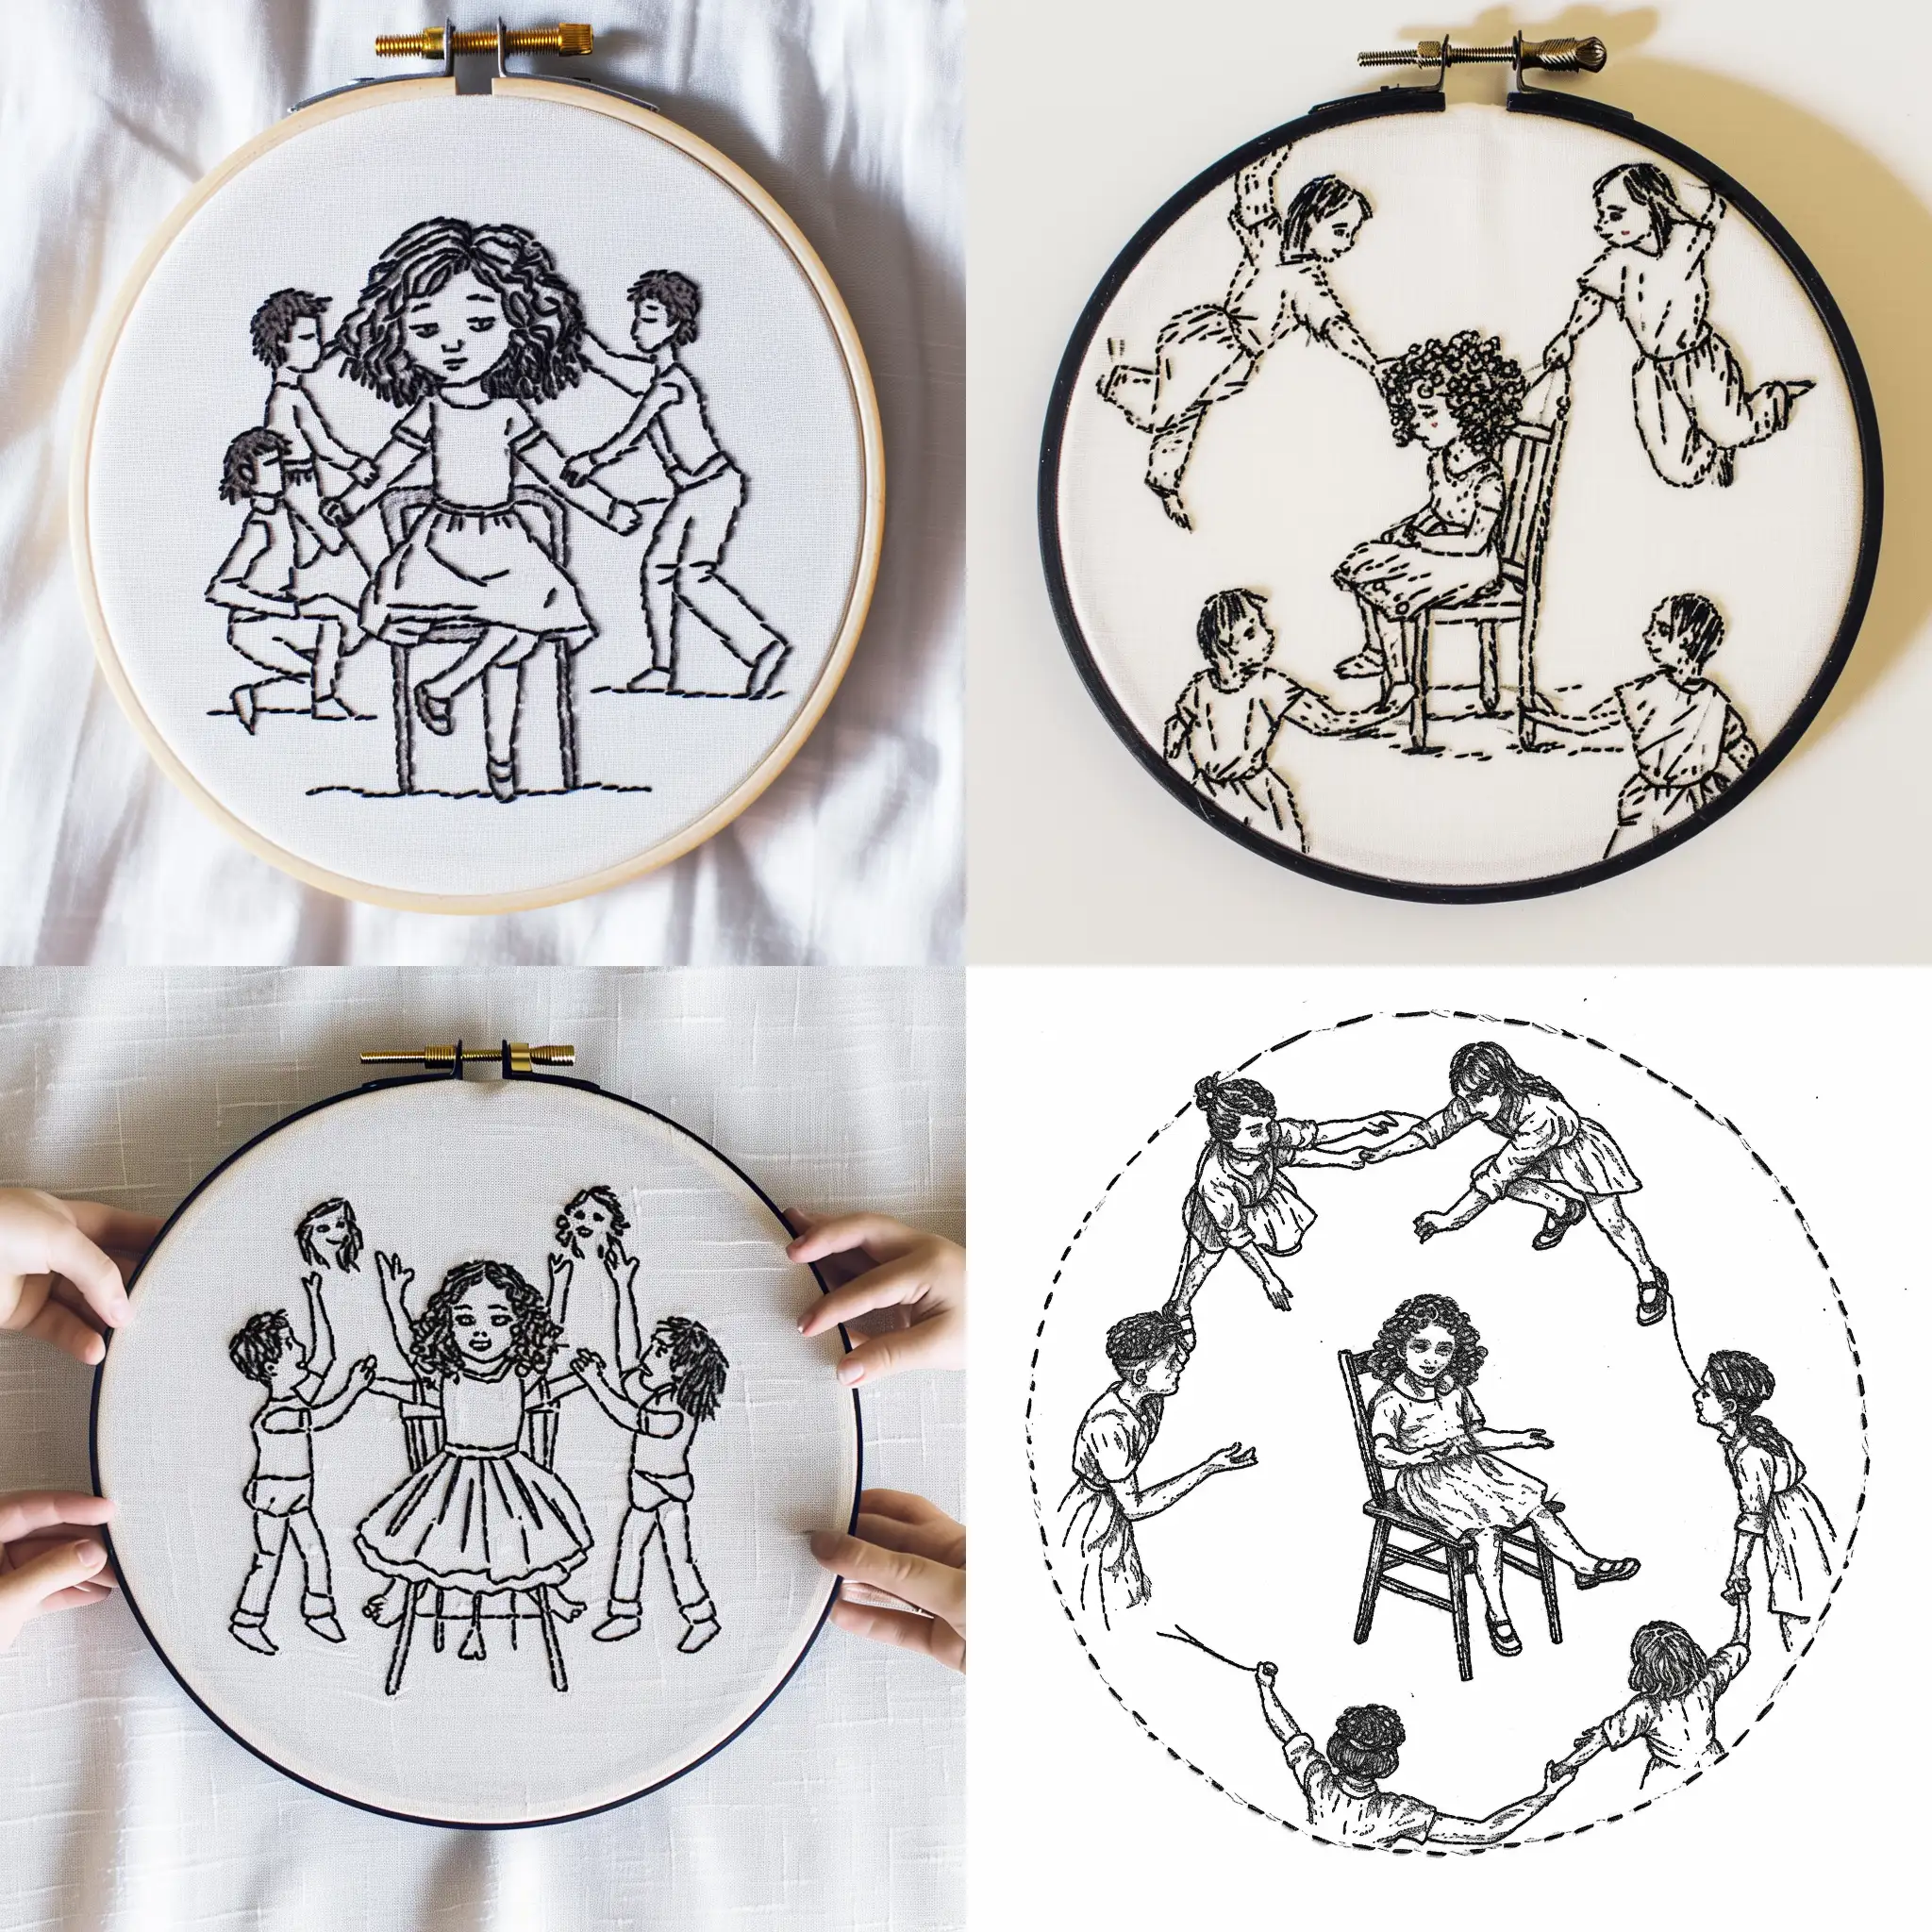 A simple, single-thread embroidery template of a  young girl with curly hair sitting on a chair that is being lifted up in a horah dance, by four people, who are dancing in a circle around her. The embroidery should only rely on a single, unbroken thread. It should be a very minimalist pattern. 